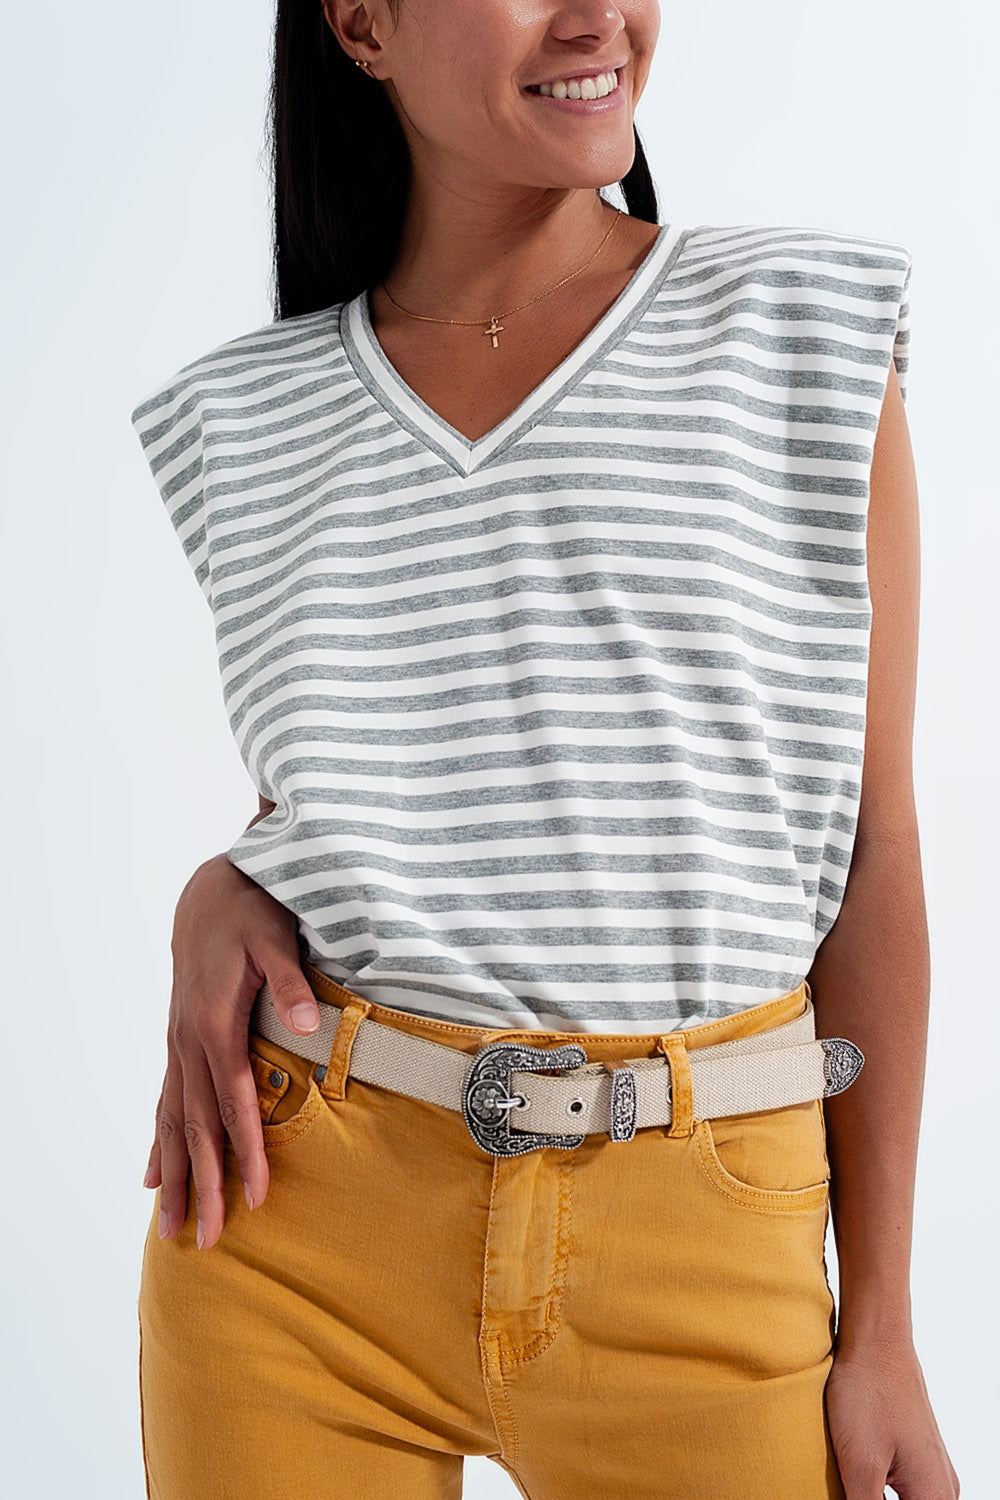 Sleeveless t shirt with shoulder pad in gray stripe Szua Store